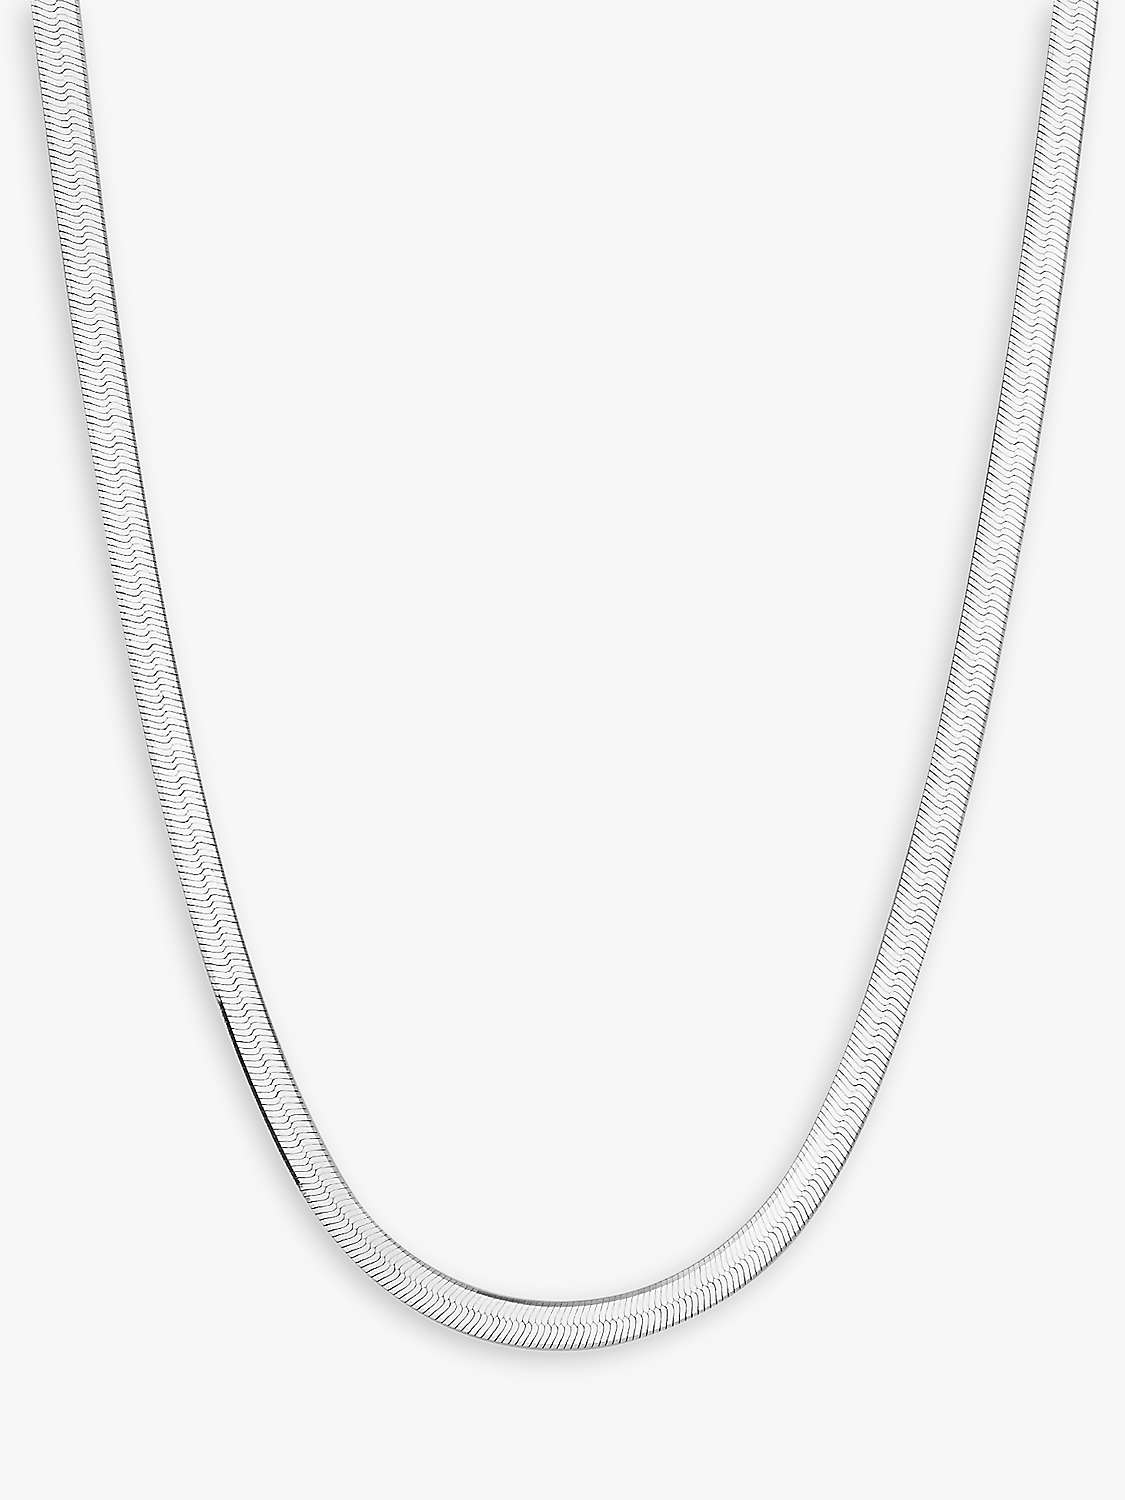 Buy Simply Silver Flat Snake Chain Necklace, Silver Online at johnlewis.com